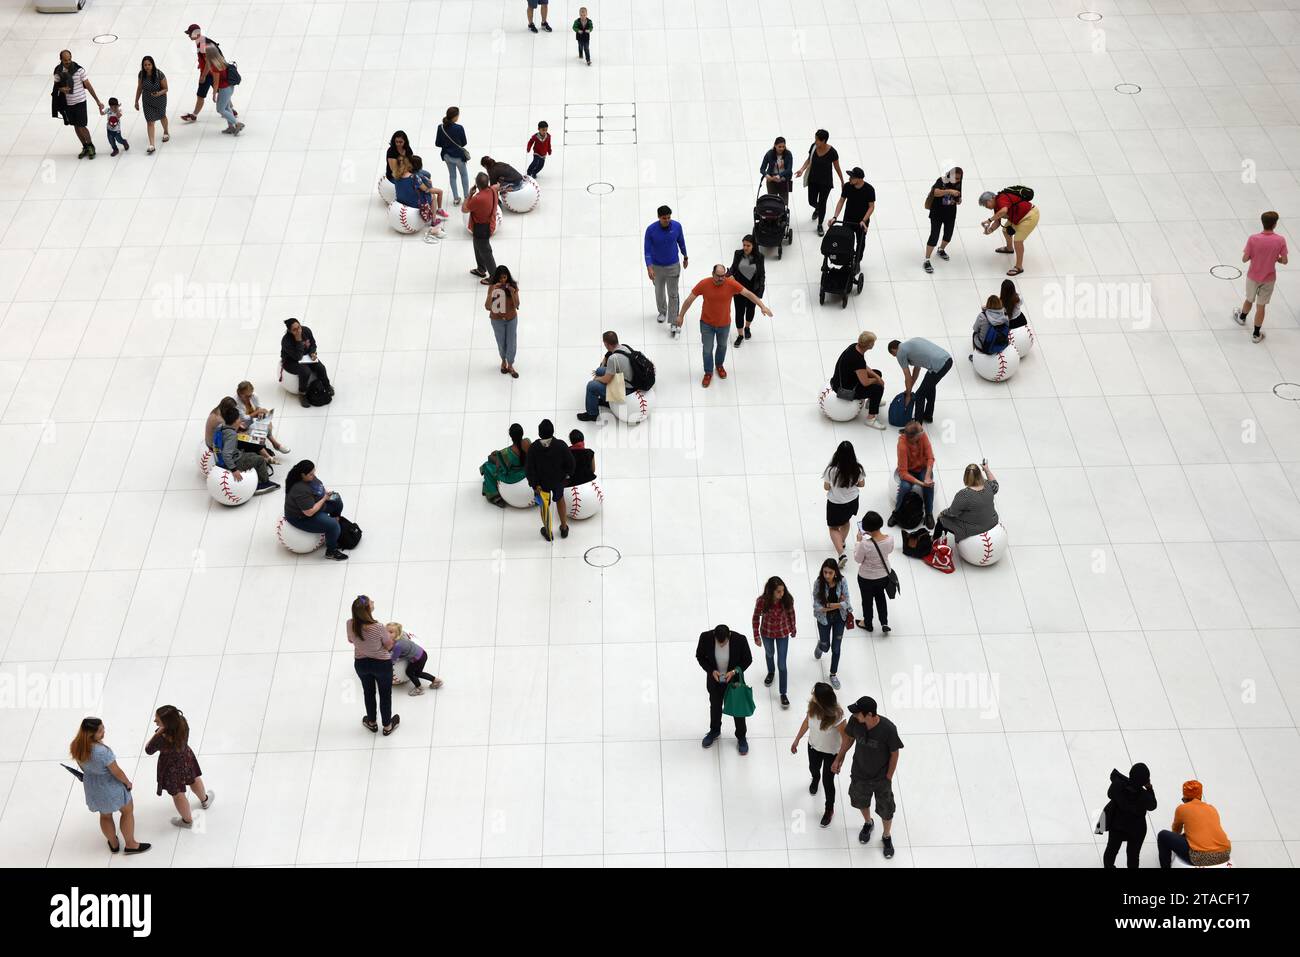 New York, USA - June 10, 2018: People in Westfield World Trade Center in New York City. Stock Photo